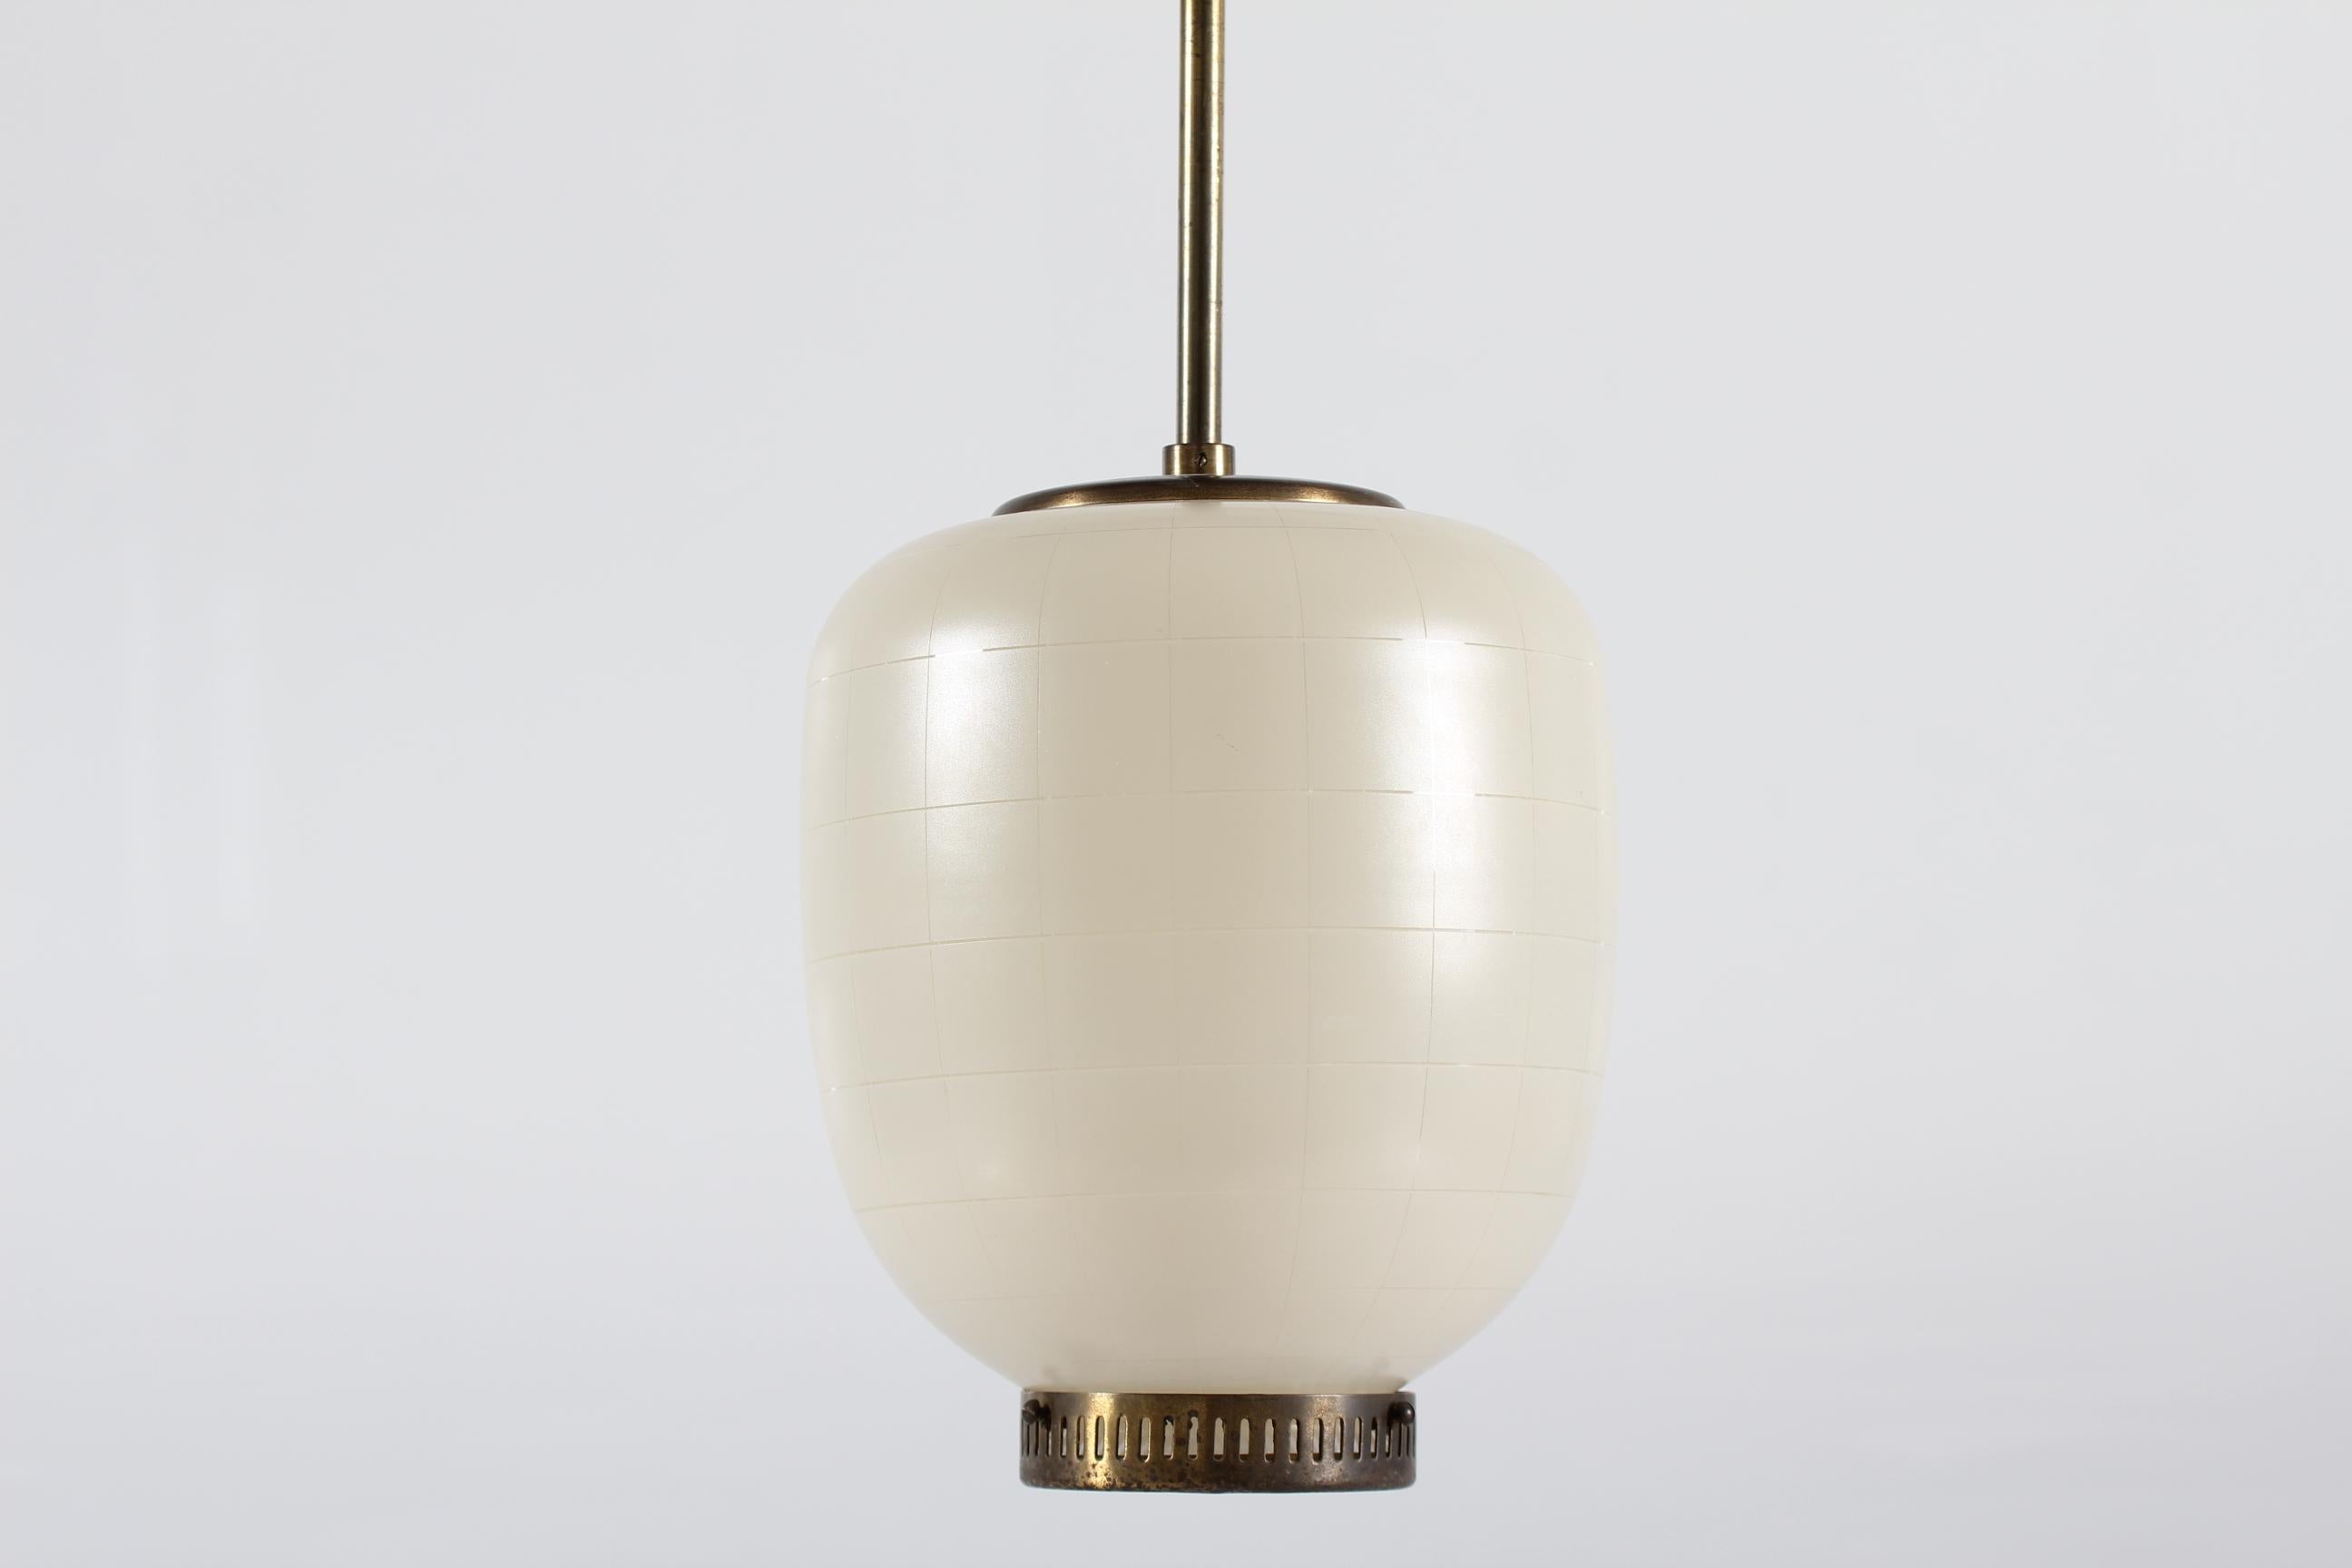 Rare edition of the China pendent made of off-white opaline glass with thin stripes and brass fittings.
It's designed by Danish Bent Karlby (1912-1998) and manufactured by the Danish lamp company Lyfa in Copenhagen in the 1960´s.

Very nice